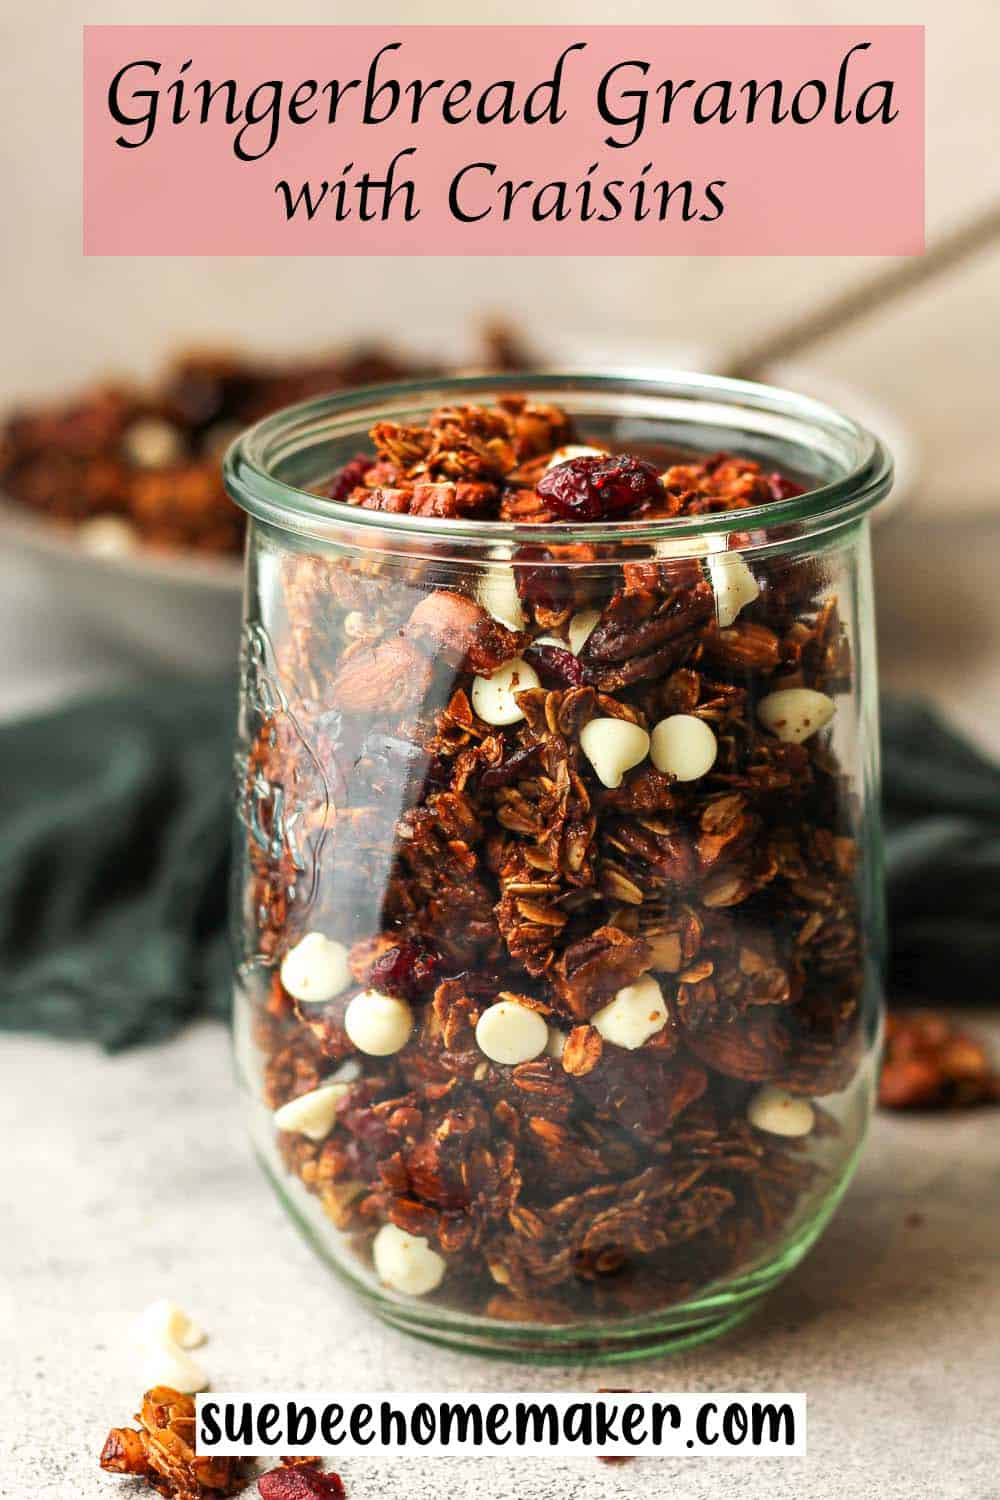 Side view of a large jar of Gingerbread granola with raisins.